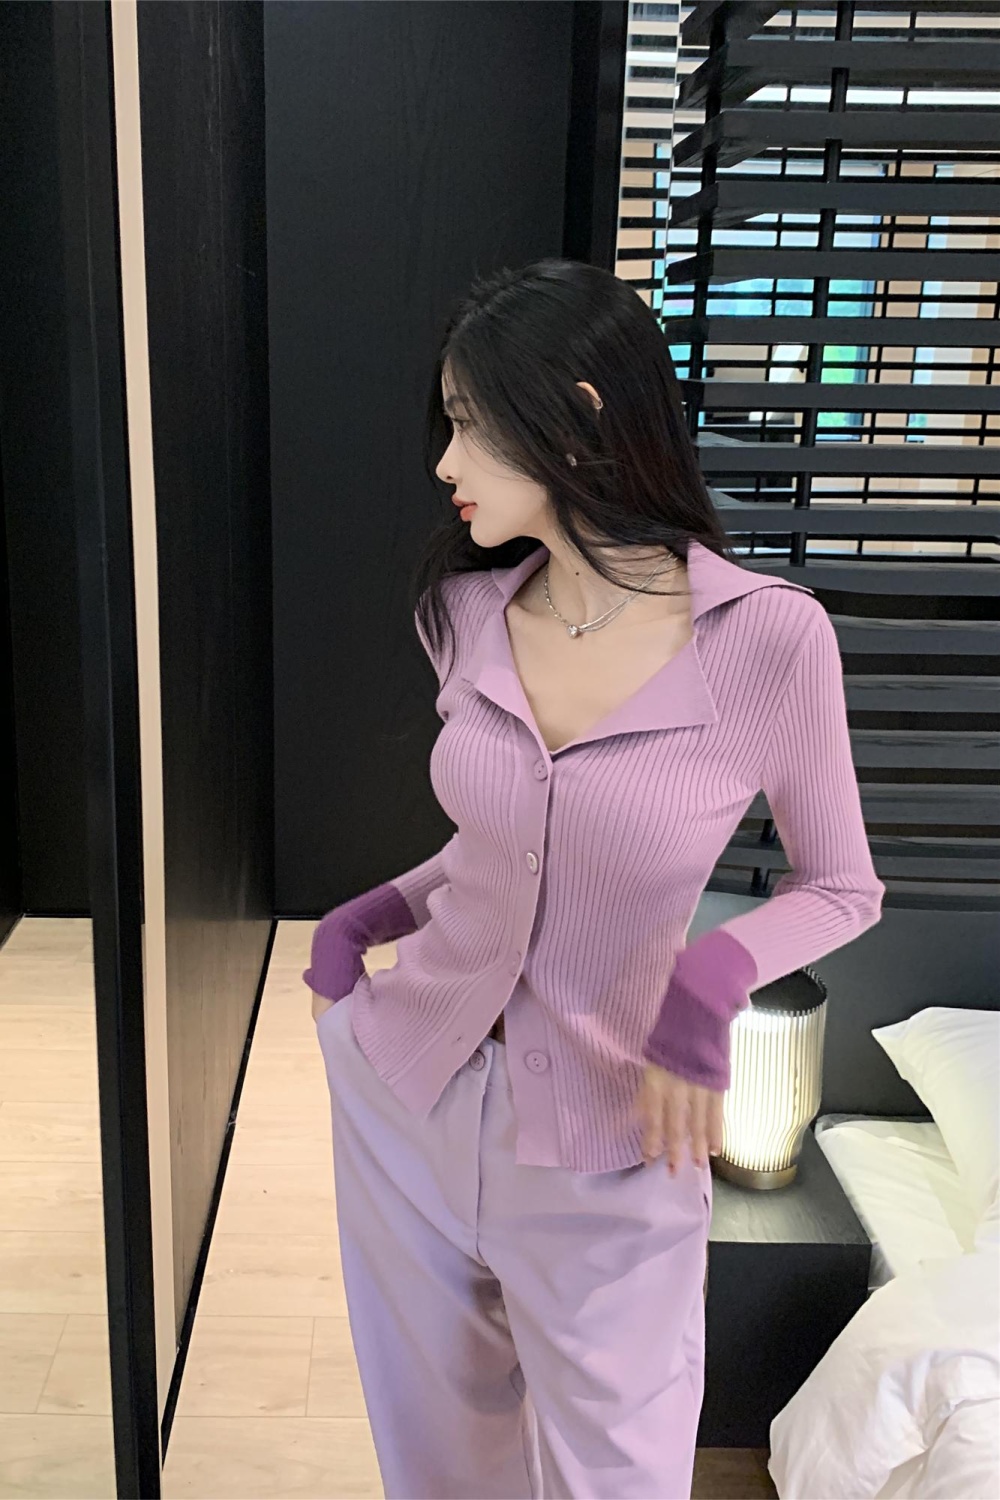 Knitted V-neck classic unique slim autumn and winter cardigan